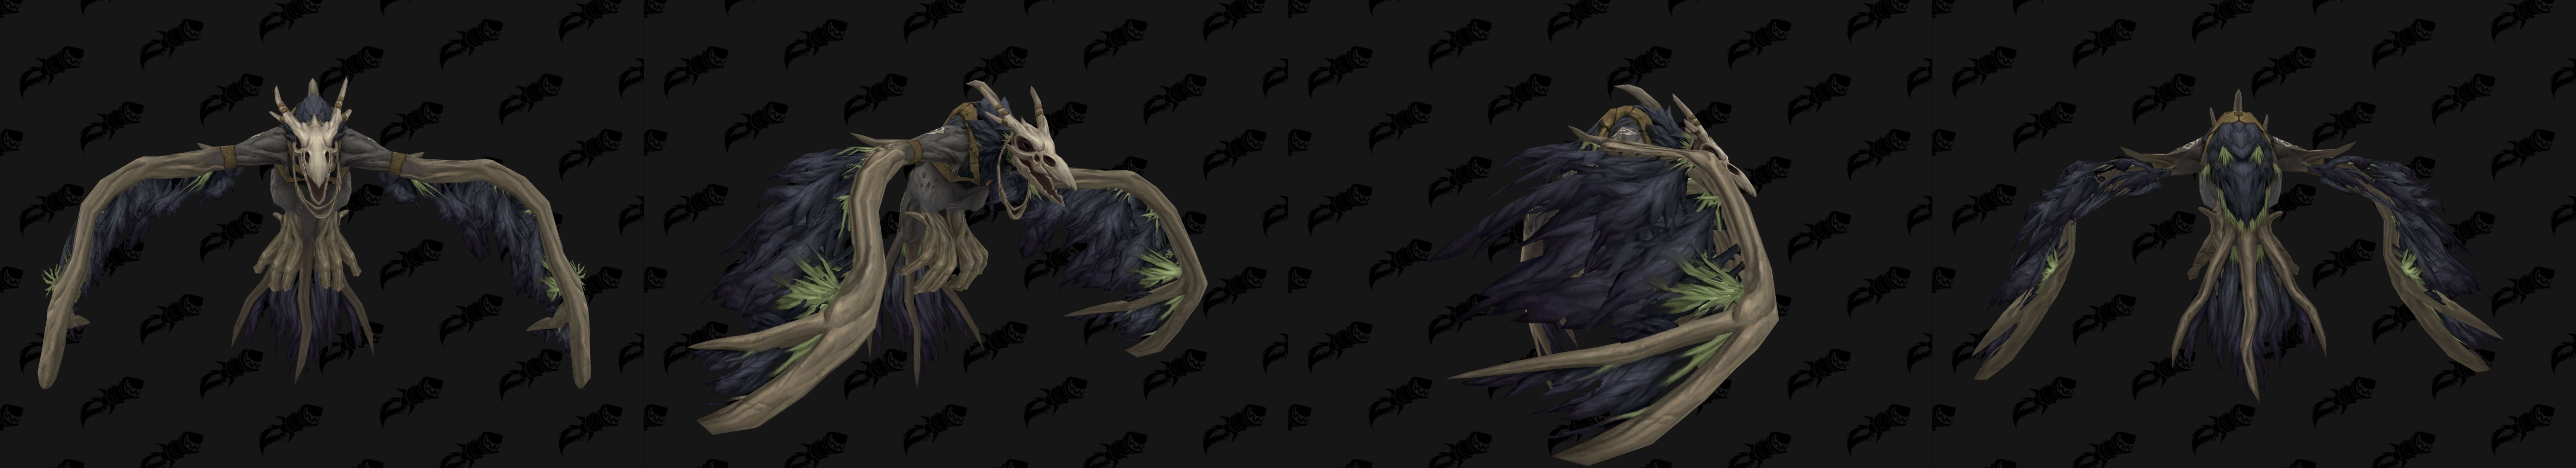 swift-flight-form-for-allied-races-druid-world-of-warcraft-forums